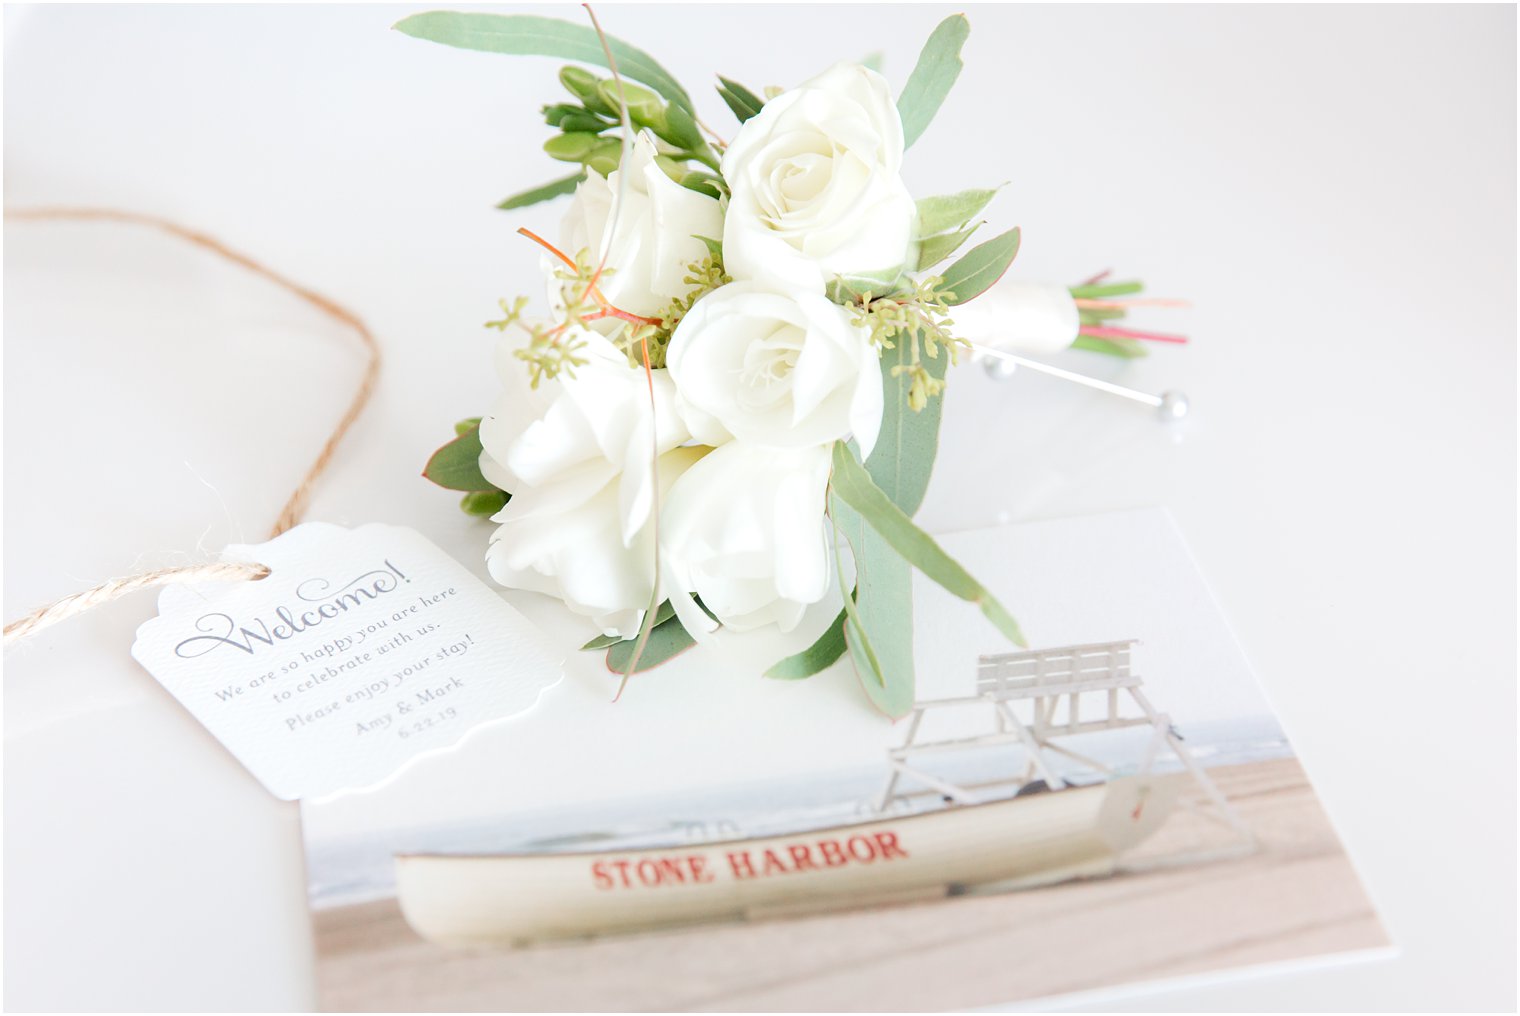 Stone Harbor post card with groom's boutonniere